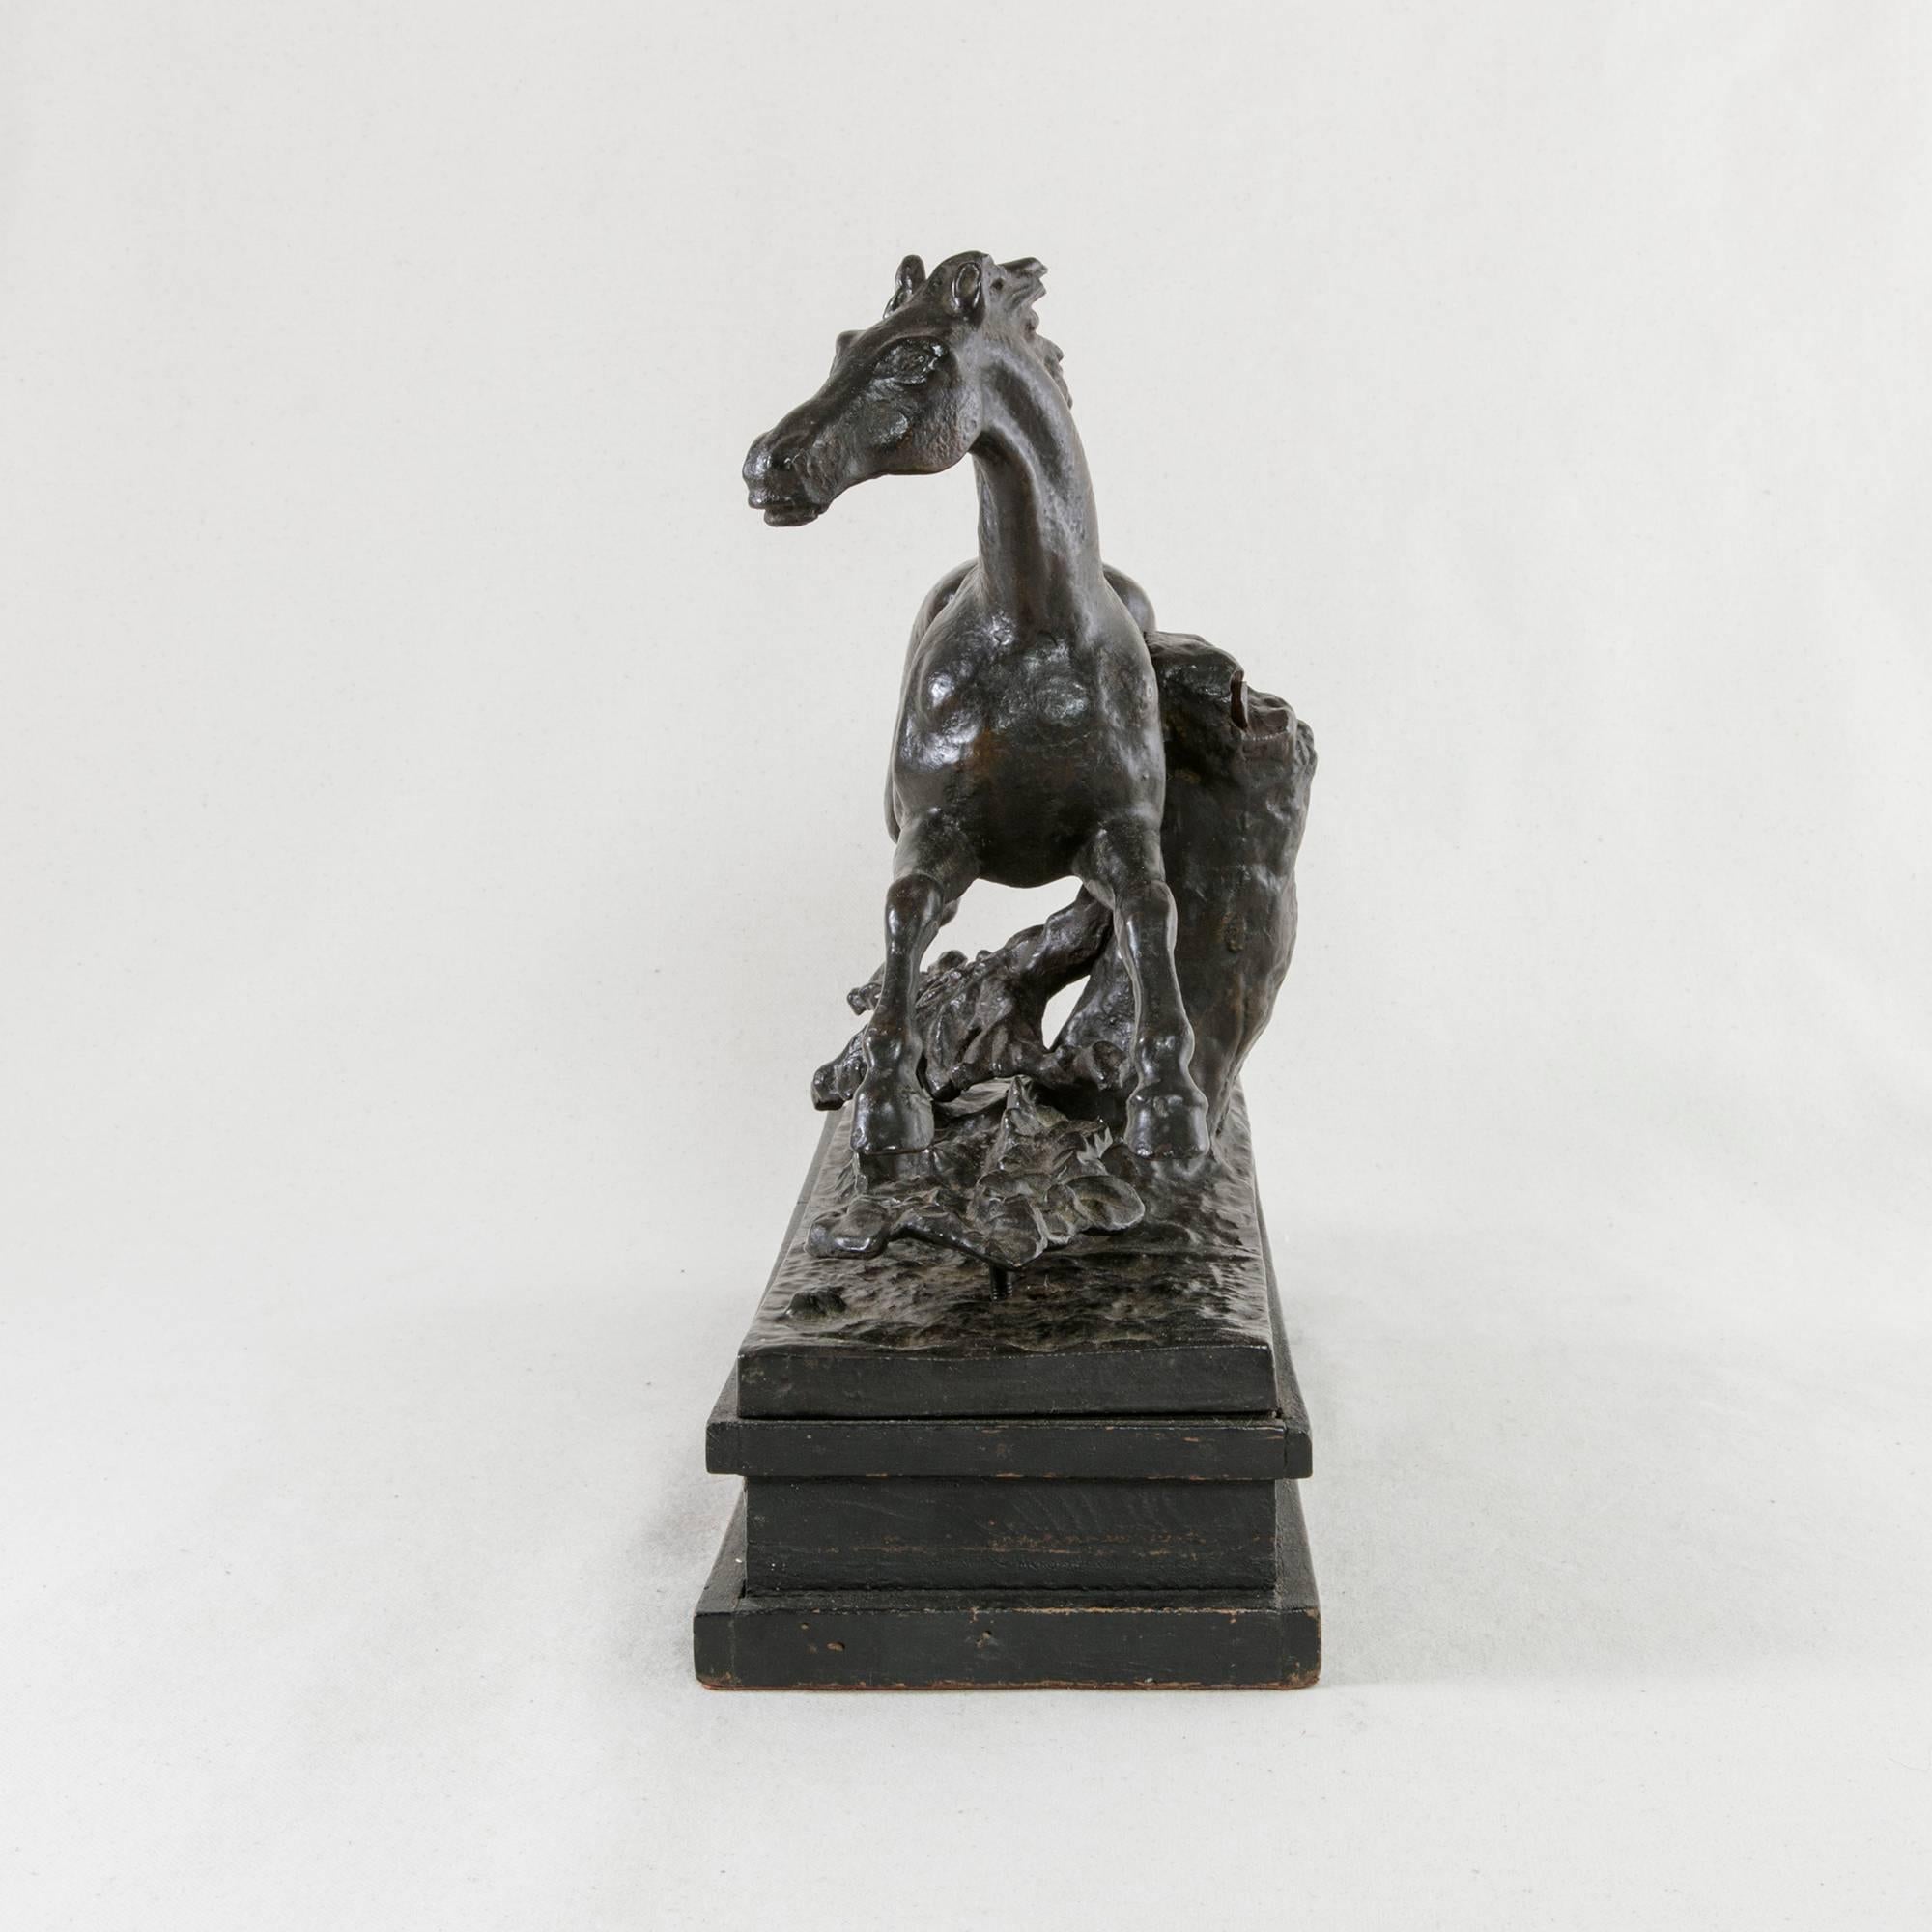 Mid-19th Century 19th Century French Napoleon III Period Cast Iron Horse Sculpture on Wooden Base